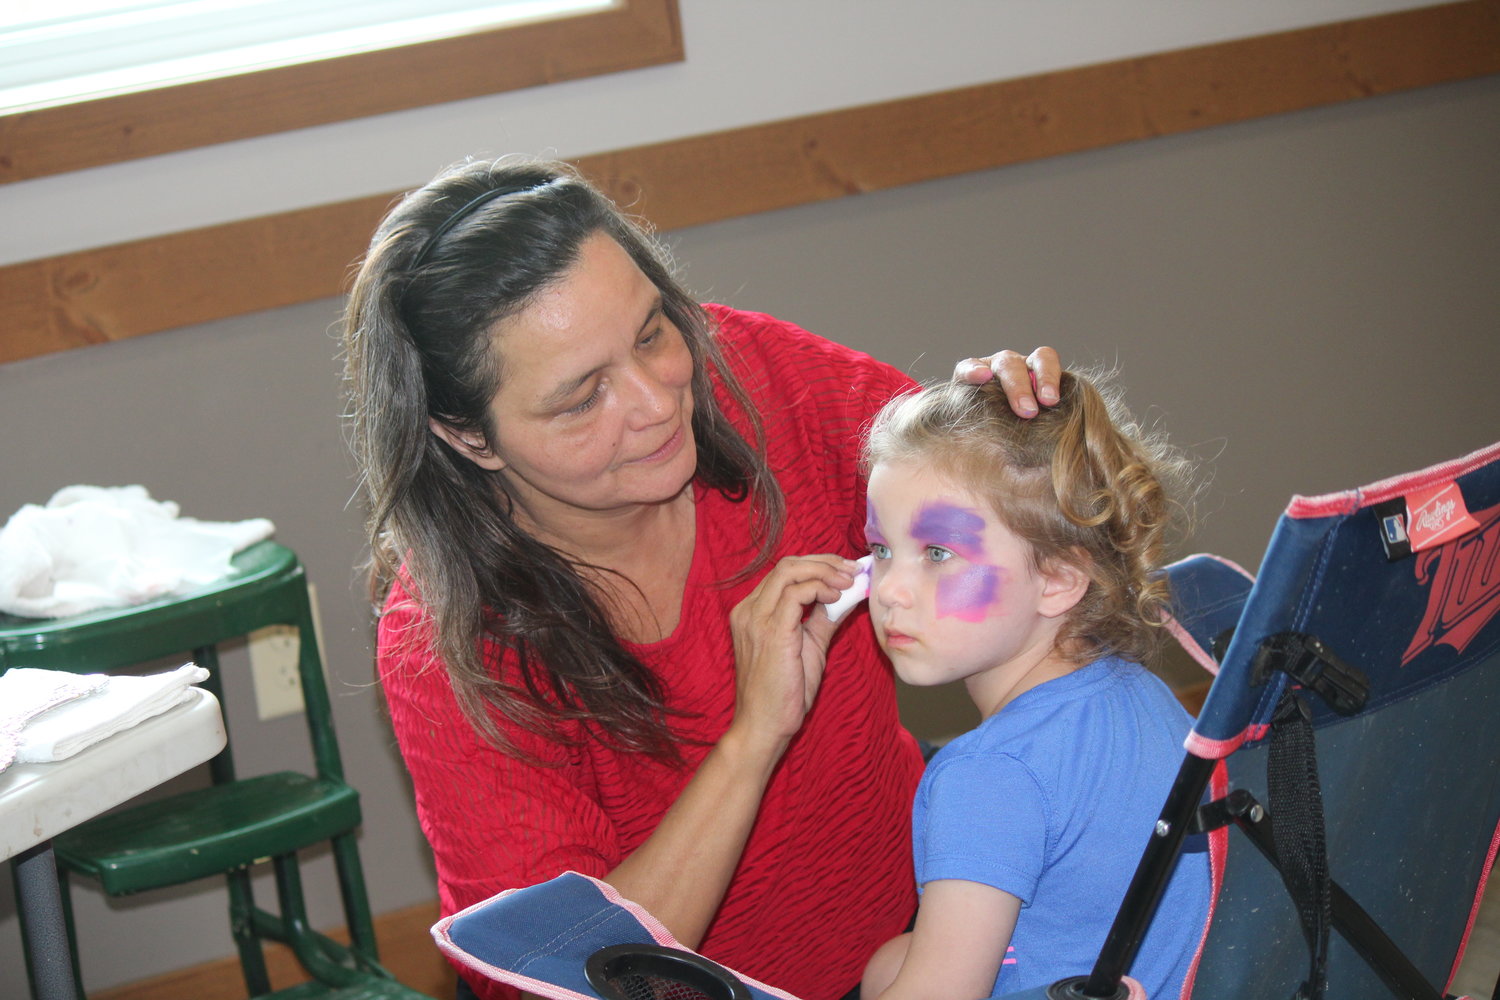 Tracey Robinson paints the face of Maren Foss, 2, of Cook inside the community center.